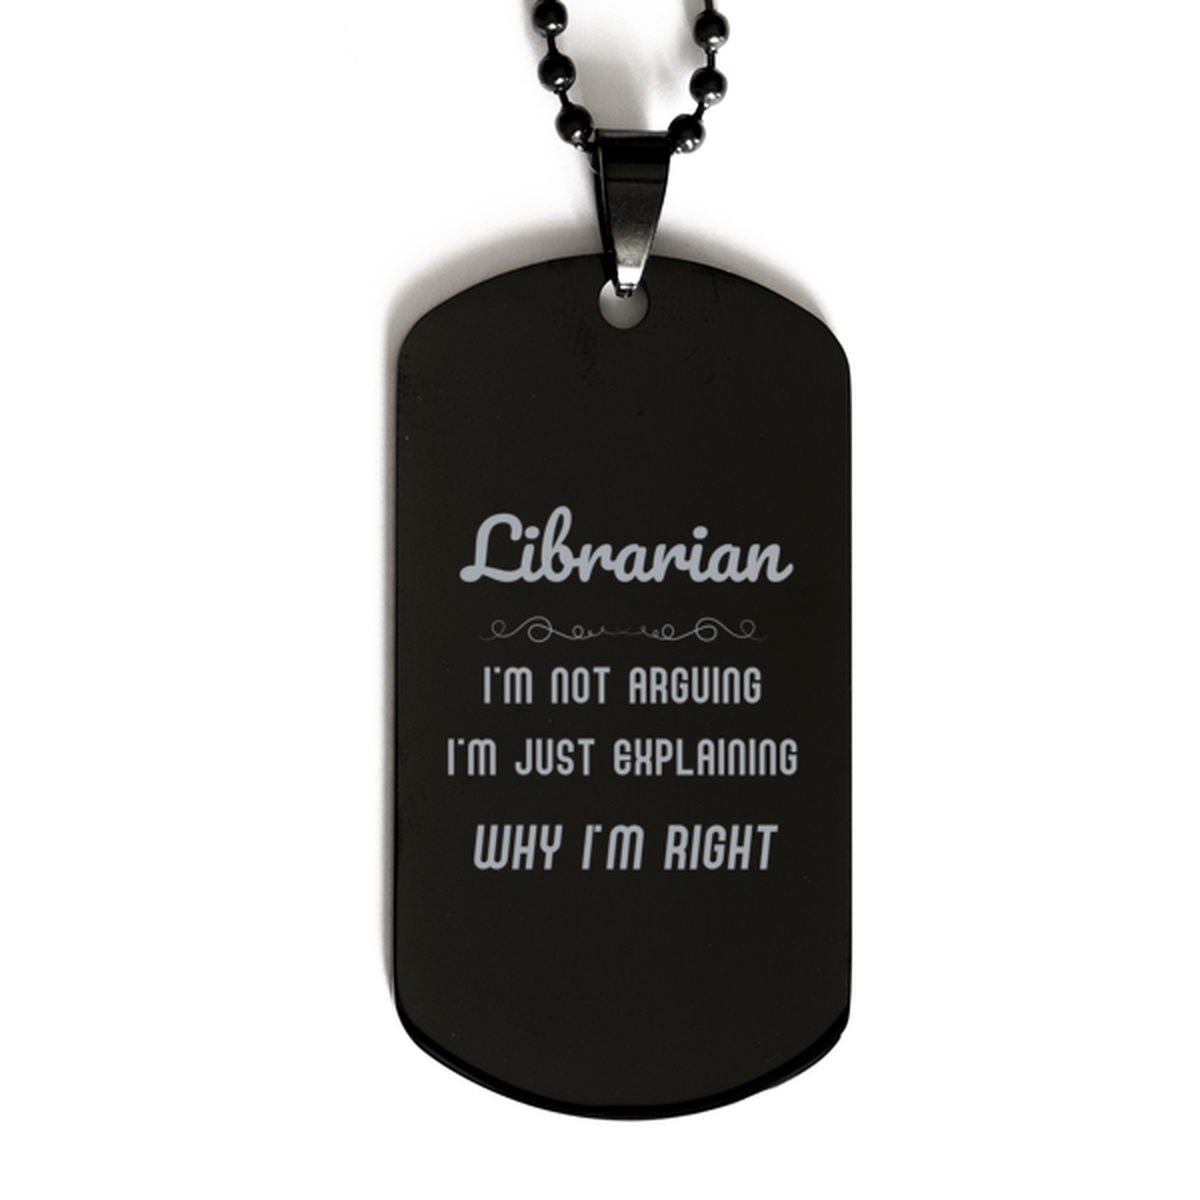 Librarian I'm not Arguing. I'm Just Explaining Why I'm RIGHT Black Dog Tag, Funny Saying Quote Librarian Gifts For Librarian Graduation Birthday Christmas Gifts for Men Women Coworker